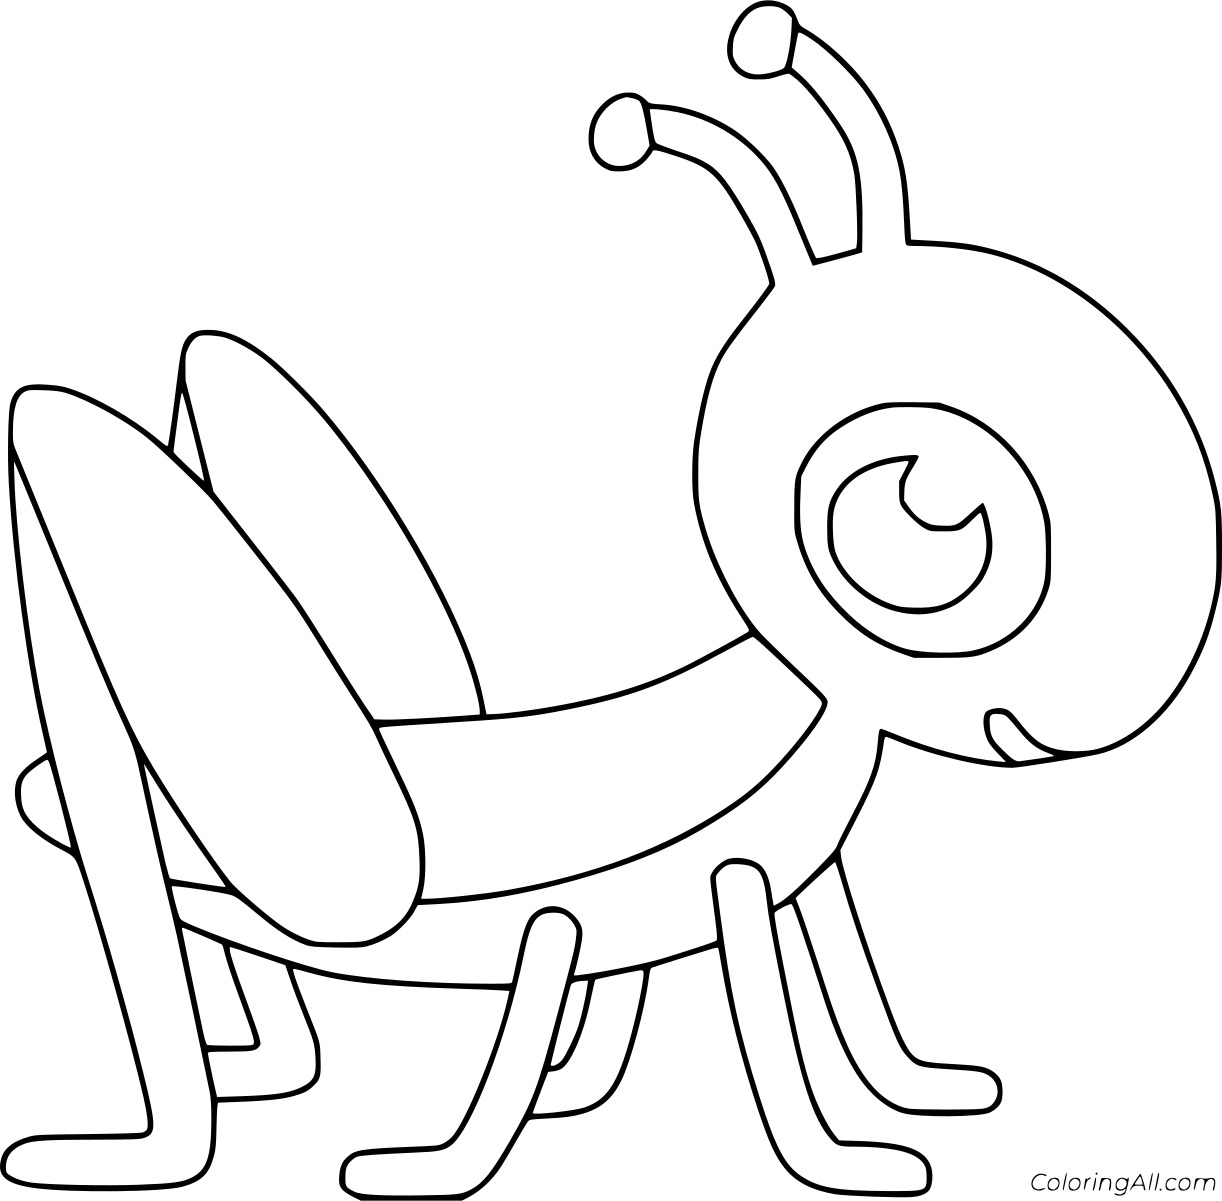 Blank Cartoon Grasshopper Coloring Page